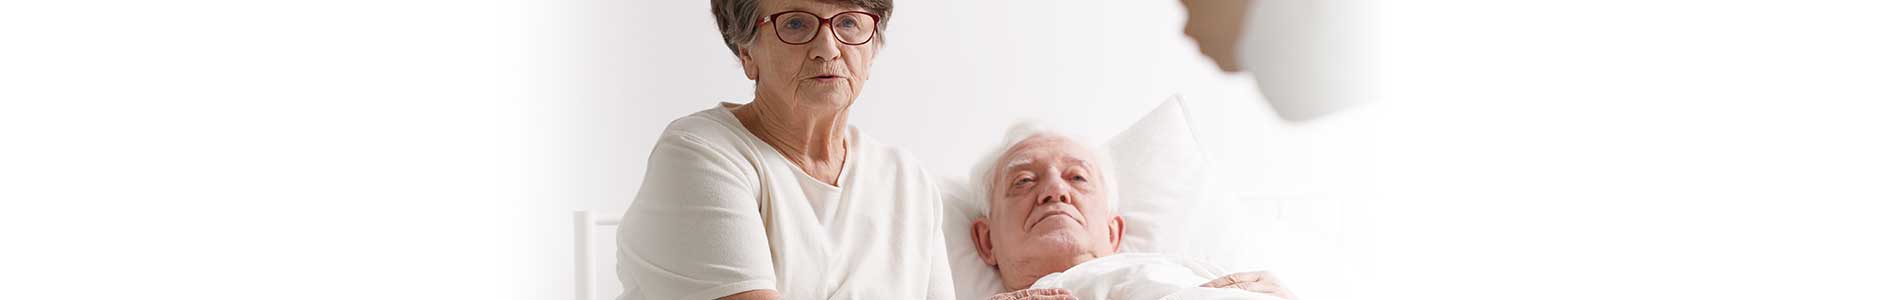 End-of-Life, Palliative, and Hospice Care